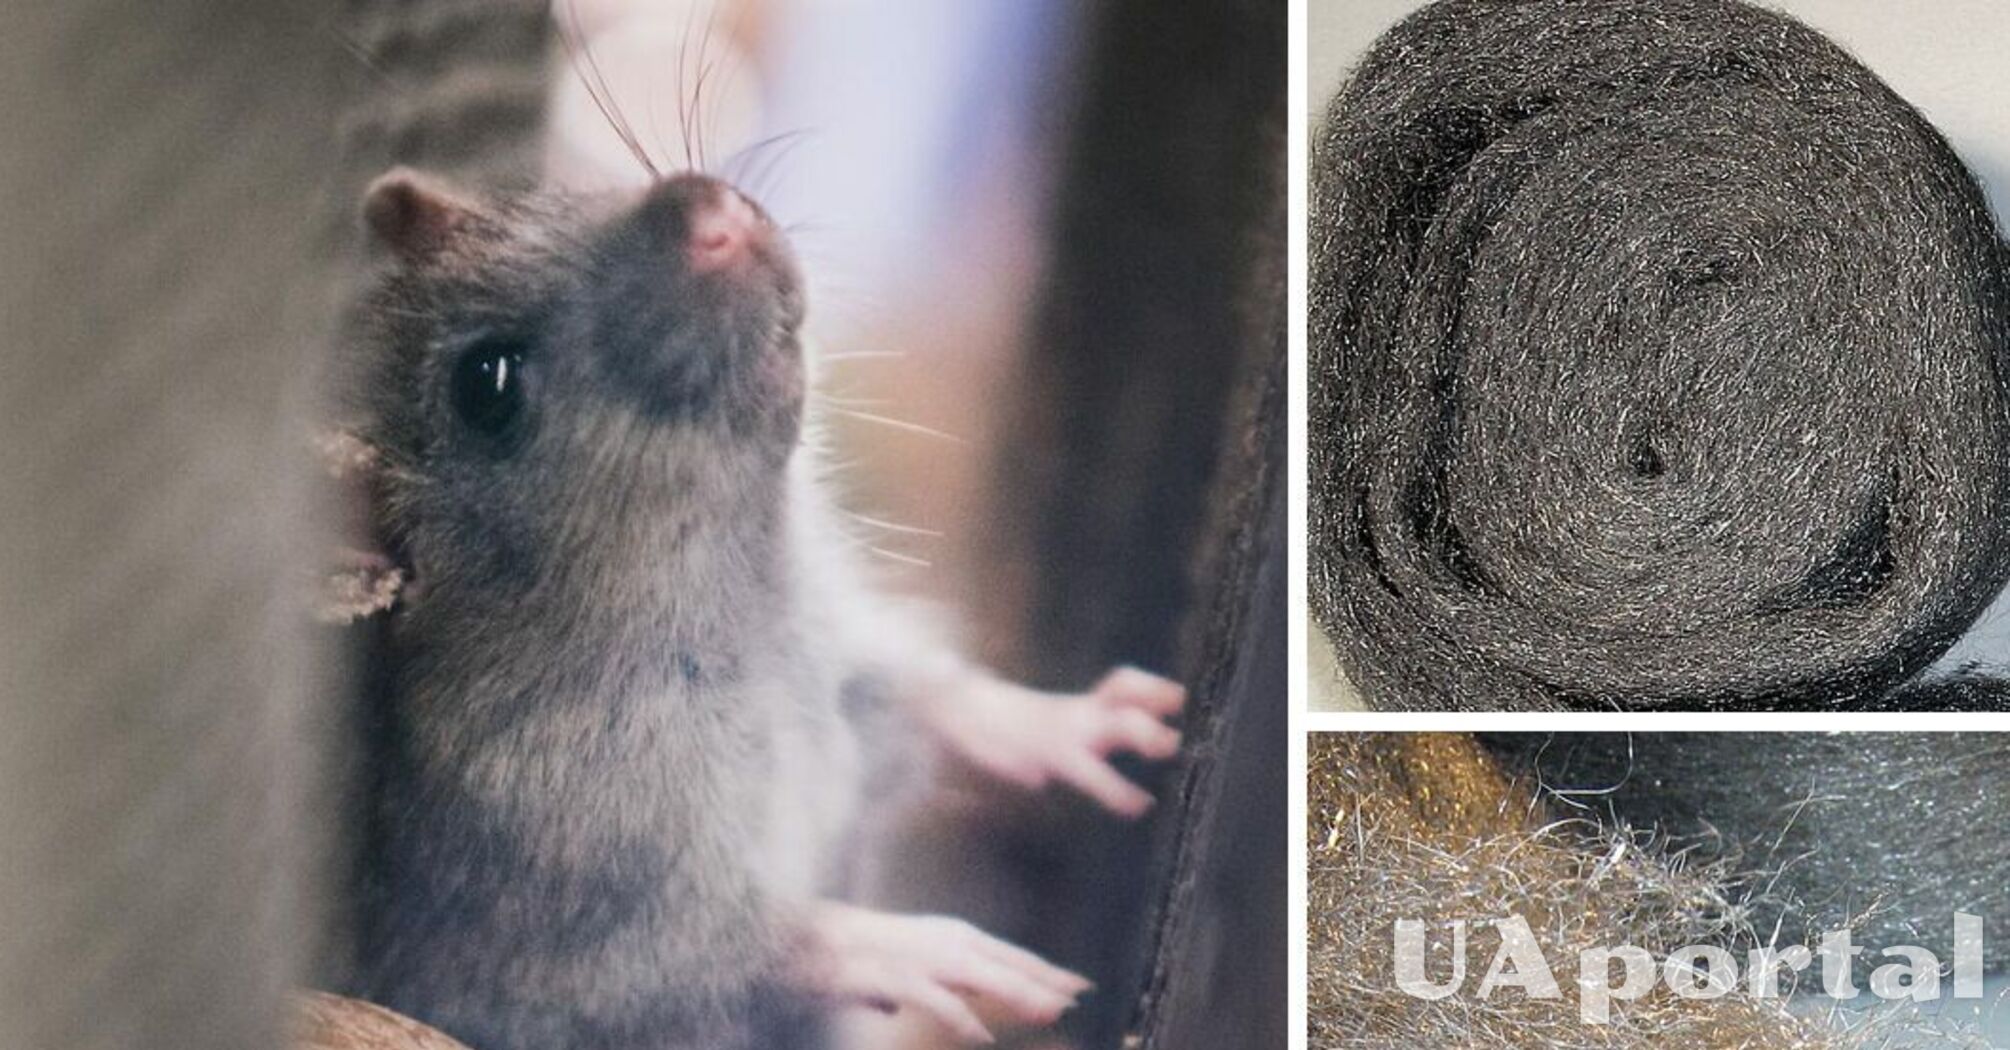 Experts have suggested a cheap way to get rid of mice without killing them